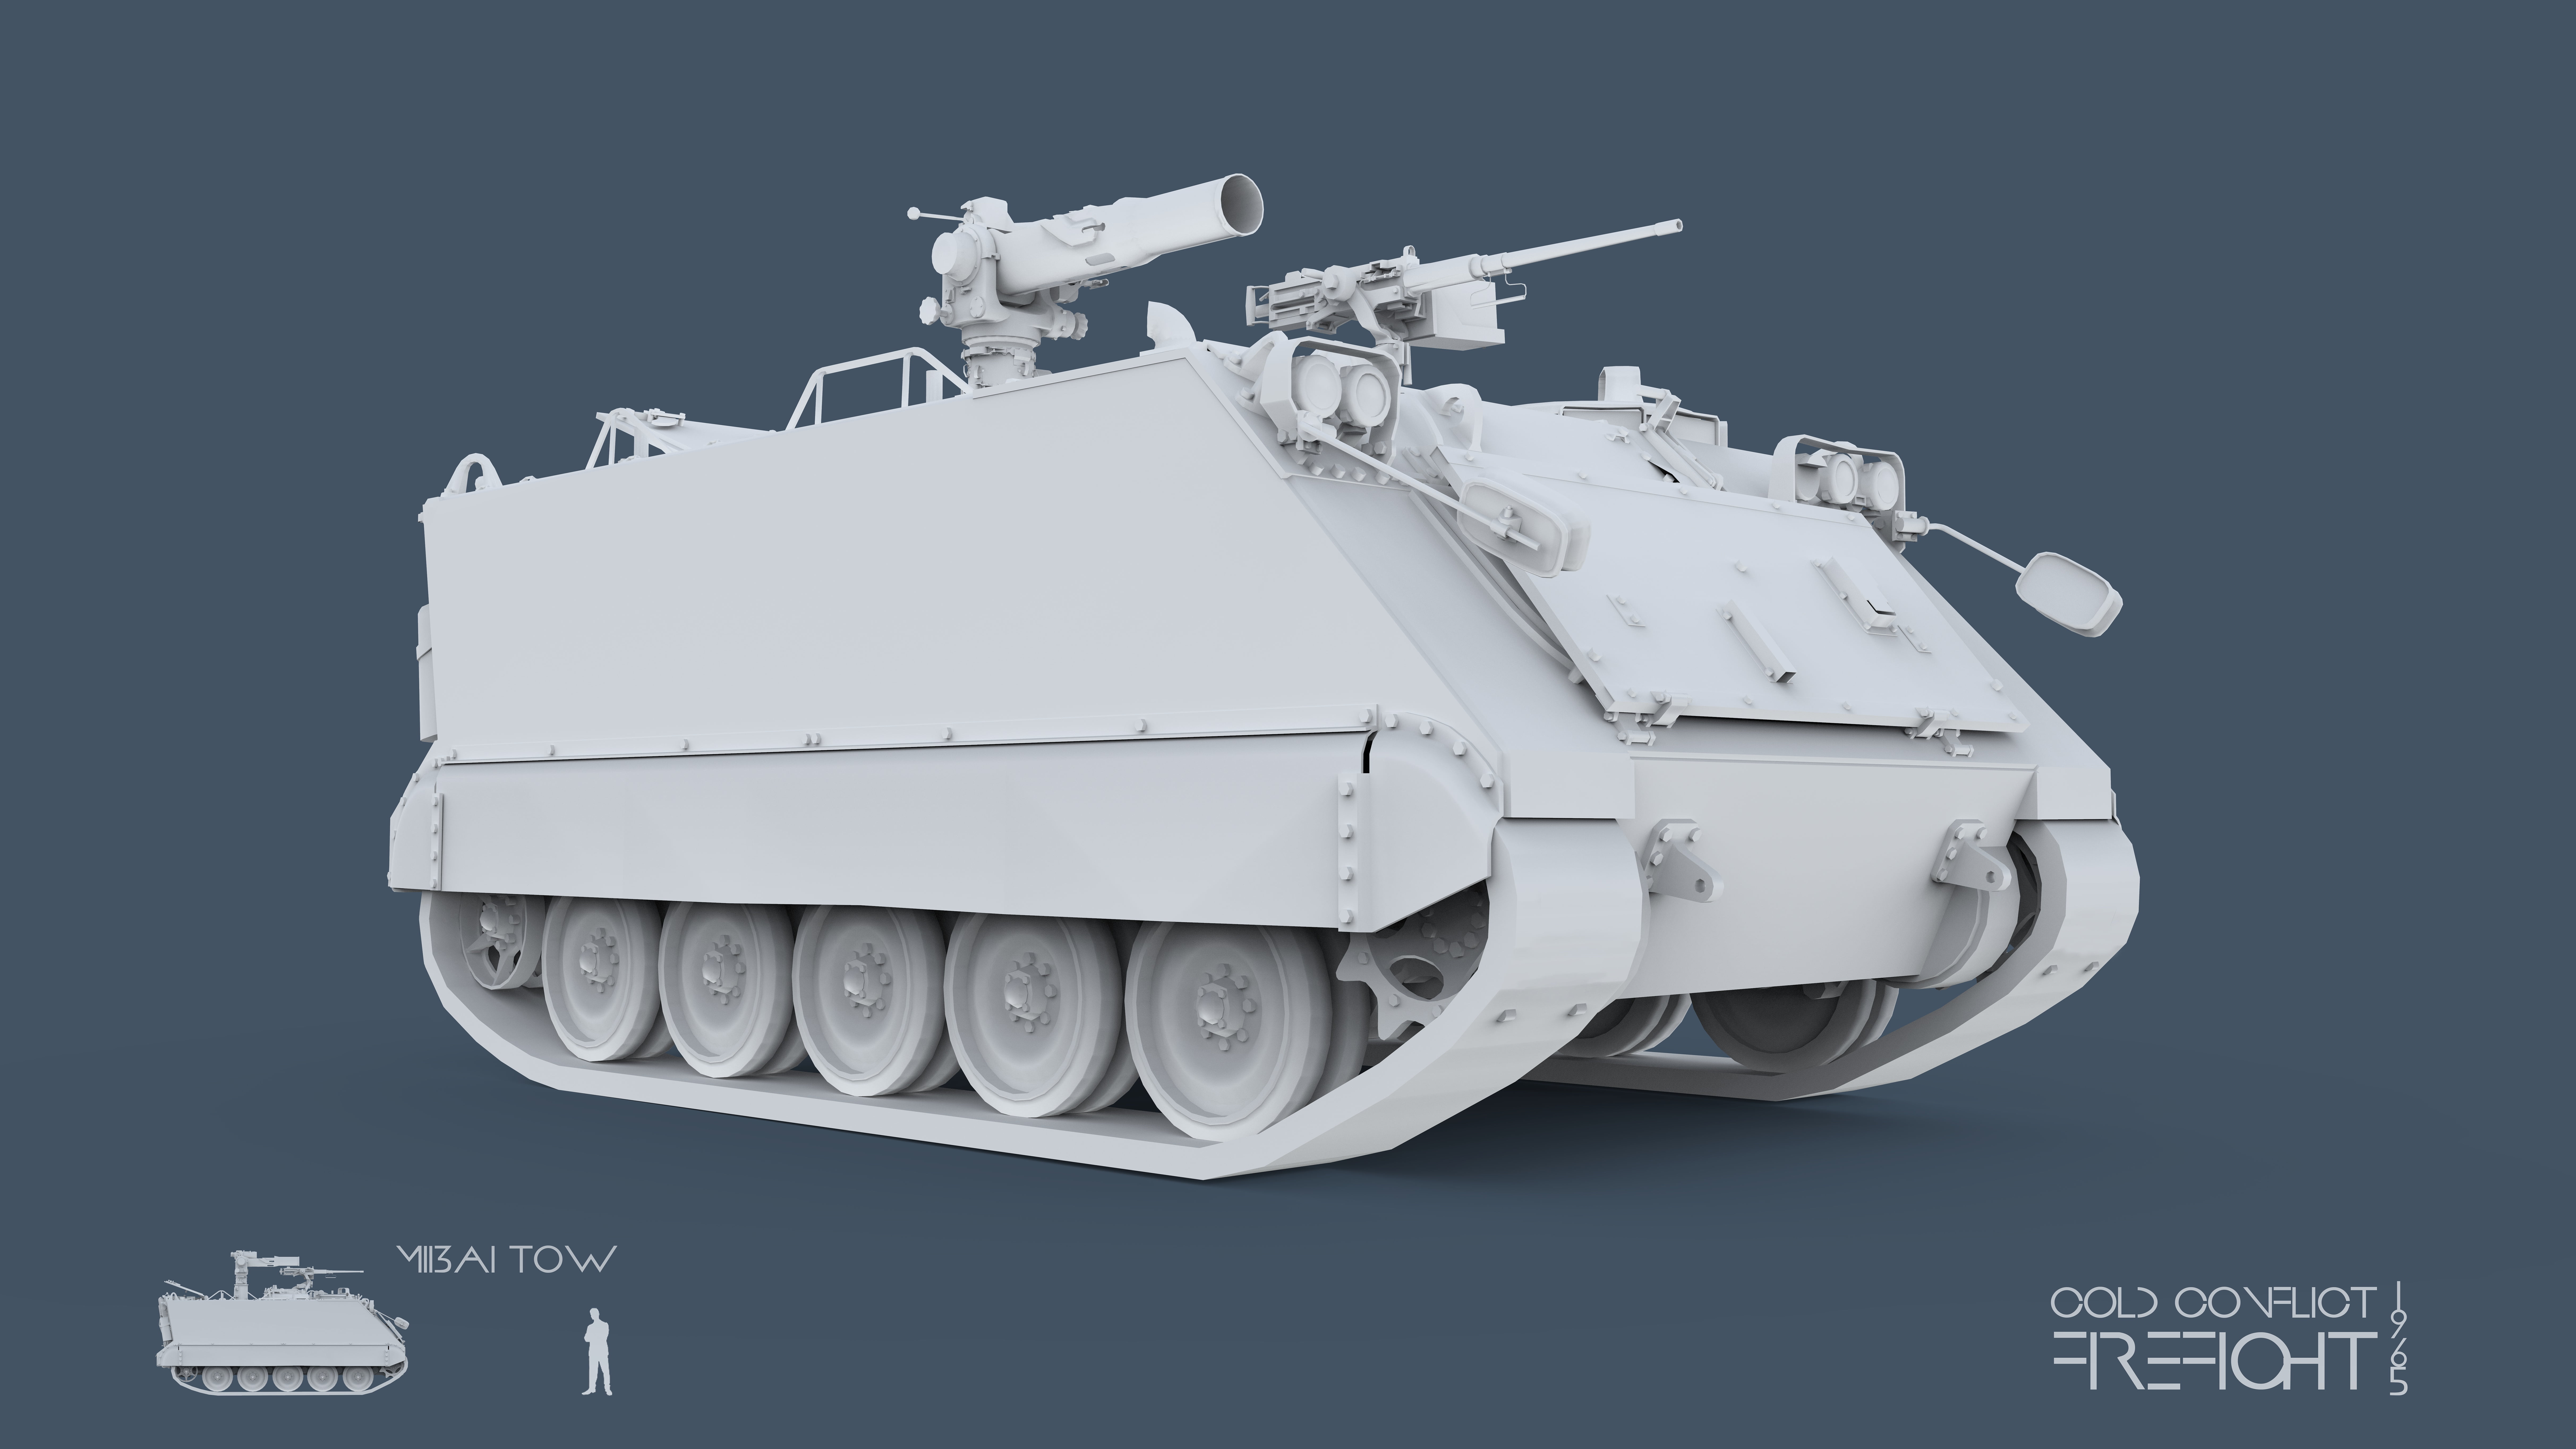 3ds max, CC Firefight 1985, keyshot, cold conflict, TOW, M113A TOW